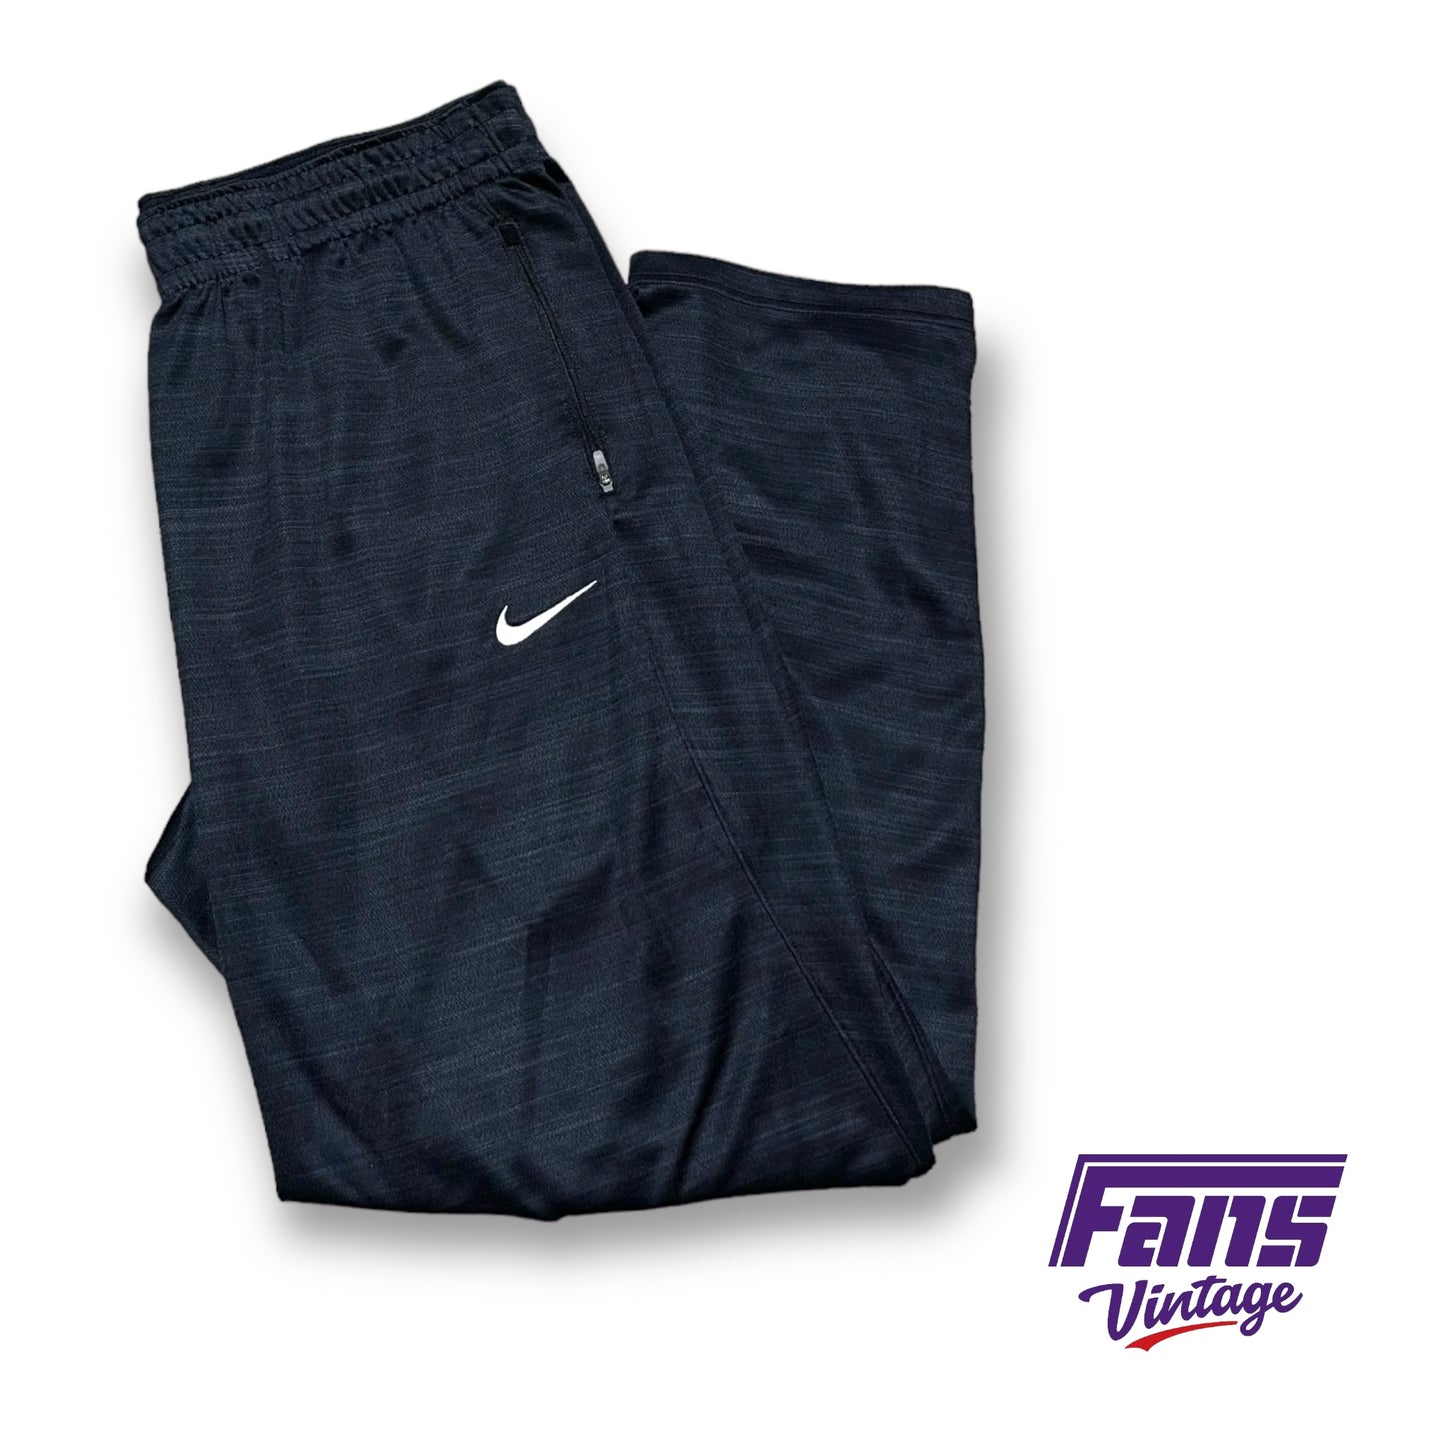 TCU Team Issued Premium Nike Athleisure Pants with zip pockets